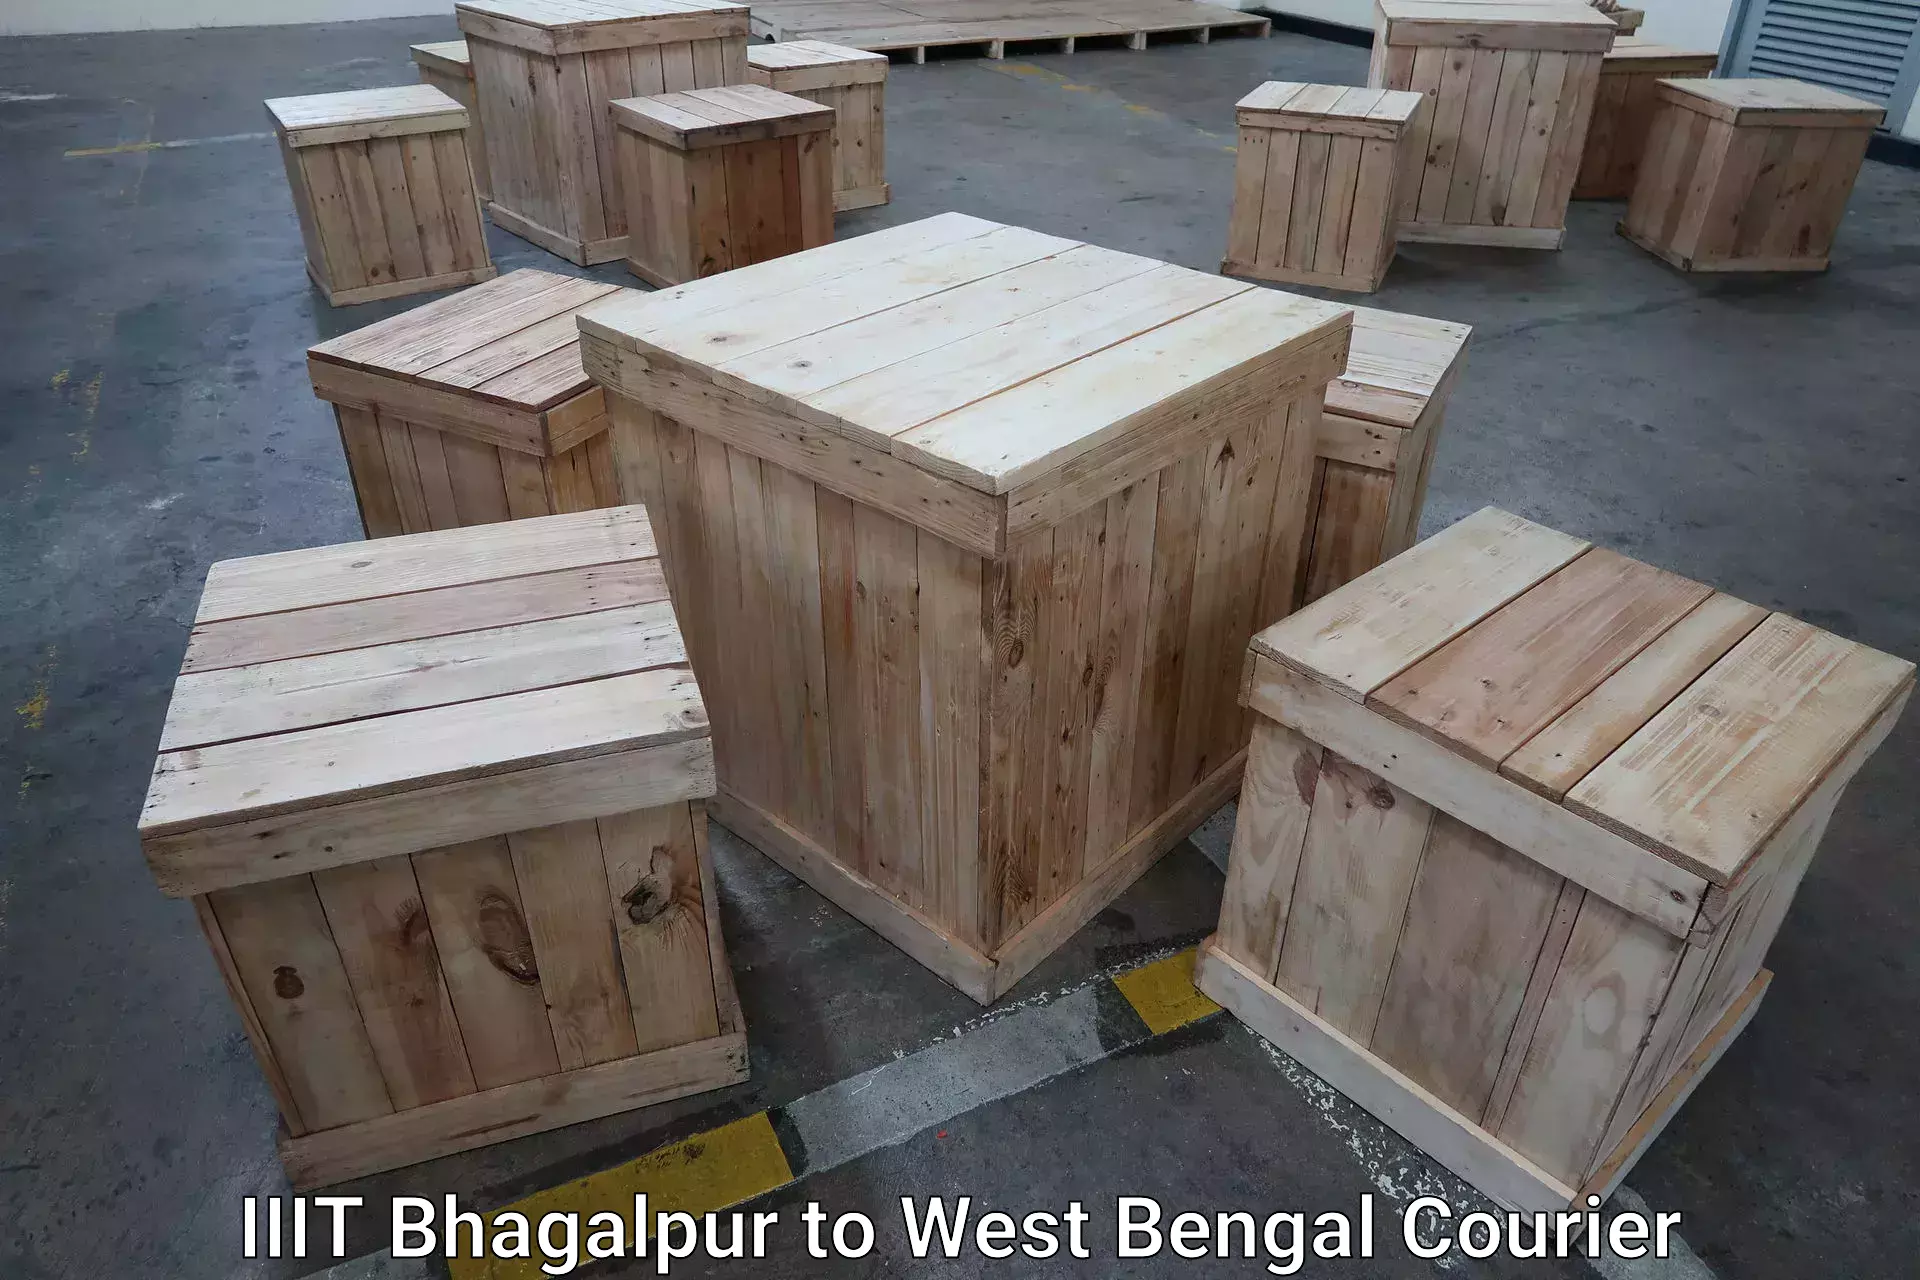 Luggage shipment processing in IIIT Bhagalpur to West Bengal